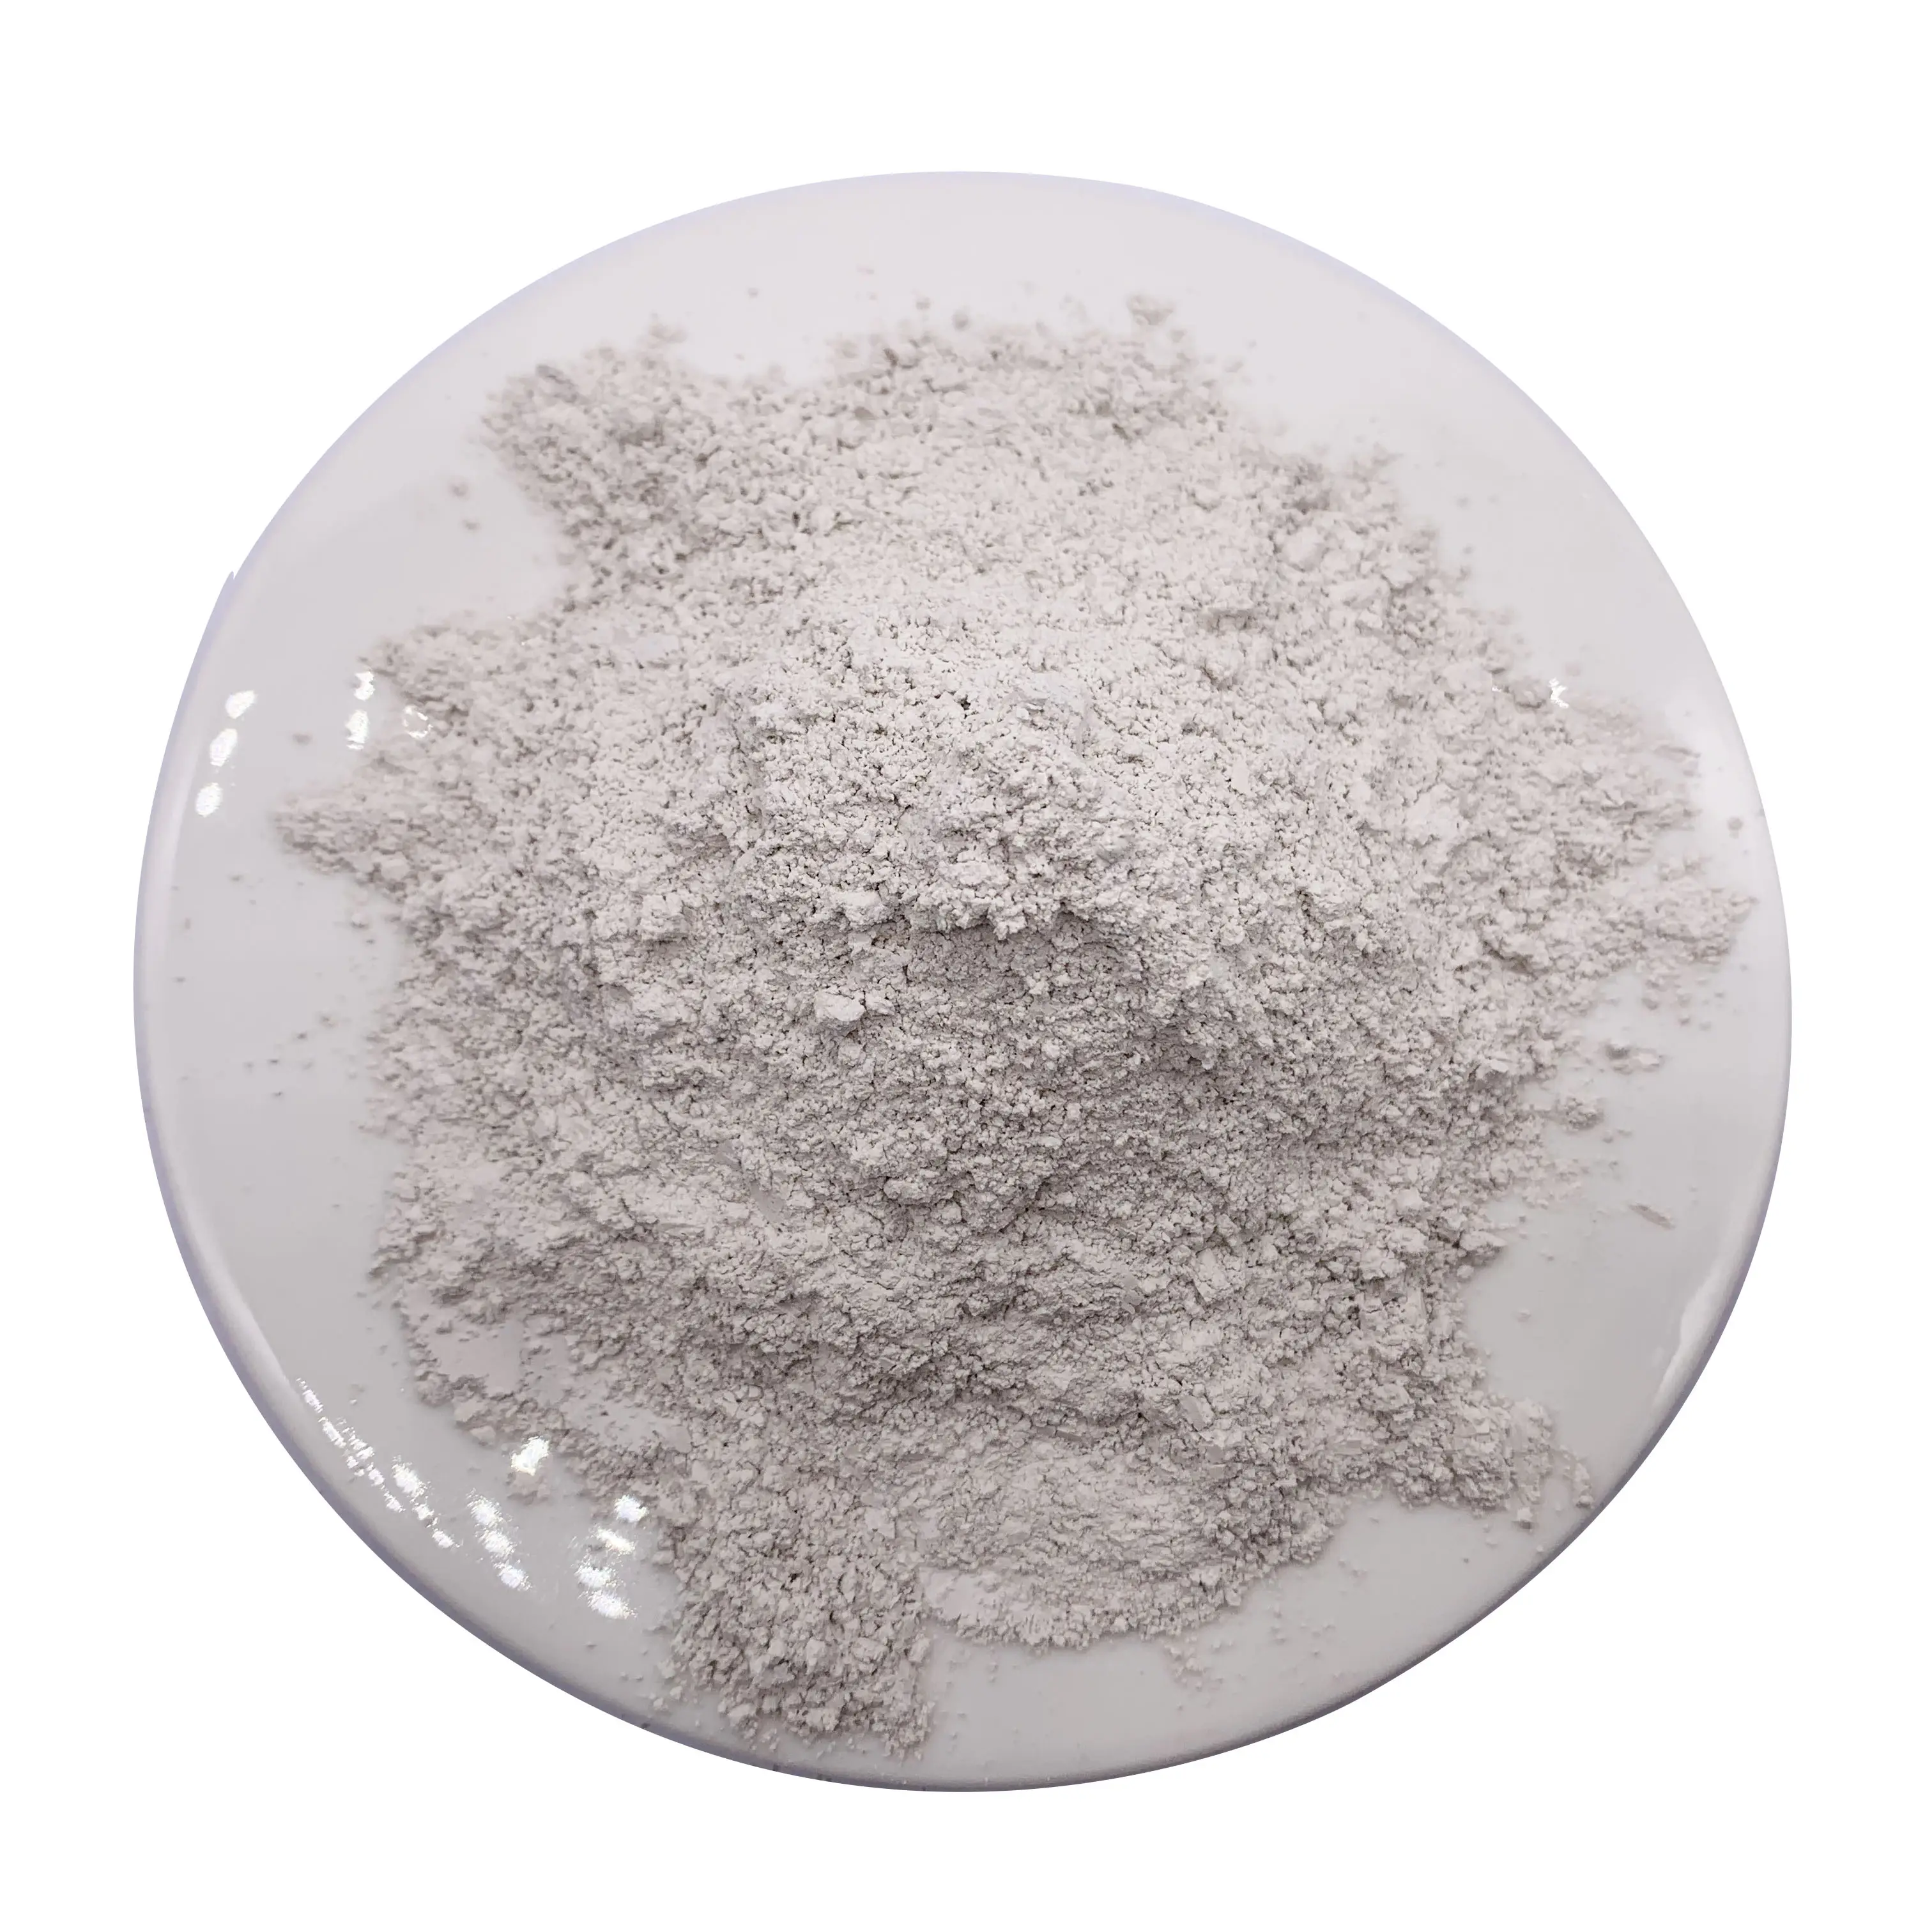 Wholesale alumina ceramic china clay /calcined washed for white porcelain products For Refractory